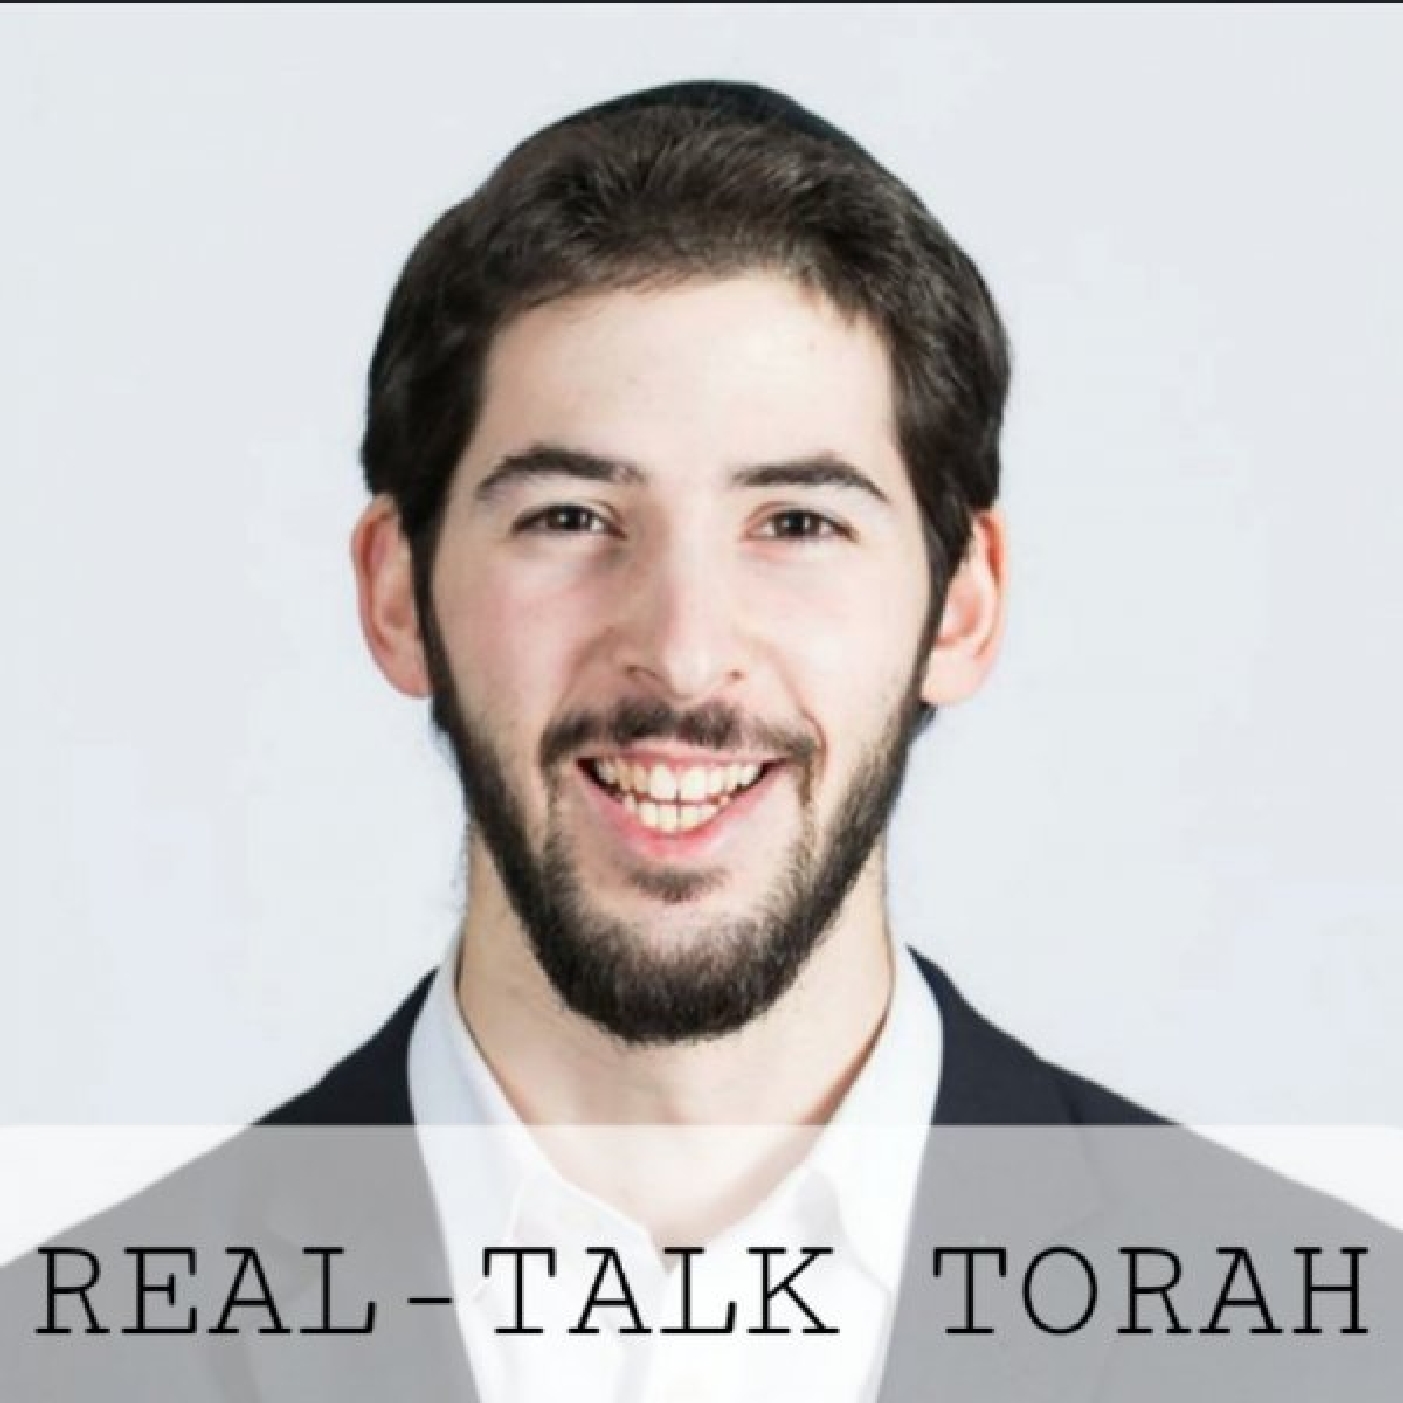 Real-Talk Torah: Is Atheism the New Paganism? ⚛ (Special Guest: R' Mendy)